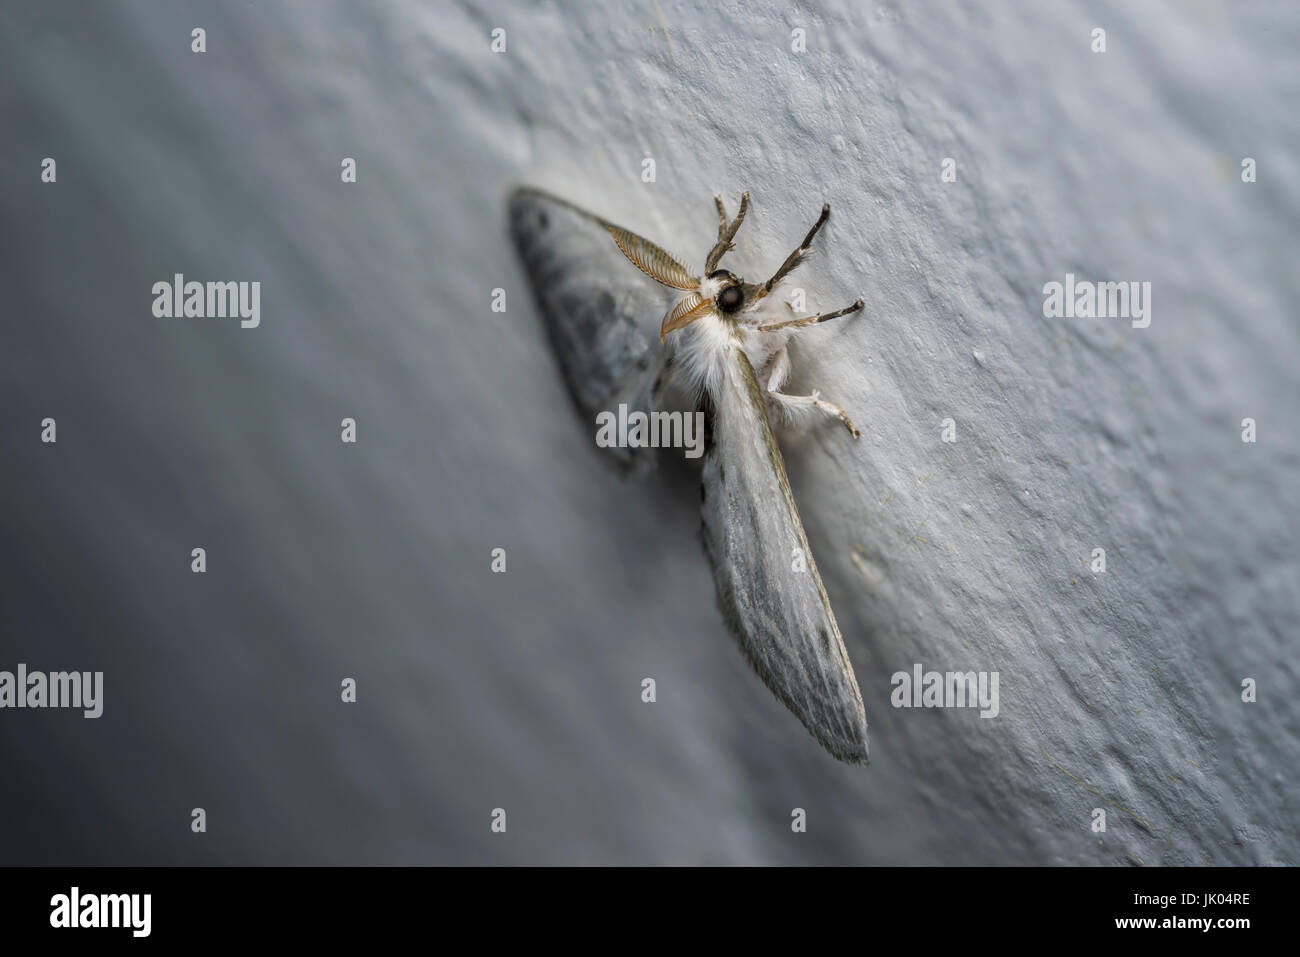 White butterfly standing on a white wall Stock Photo